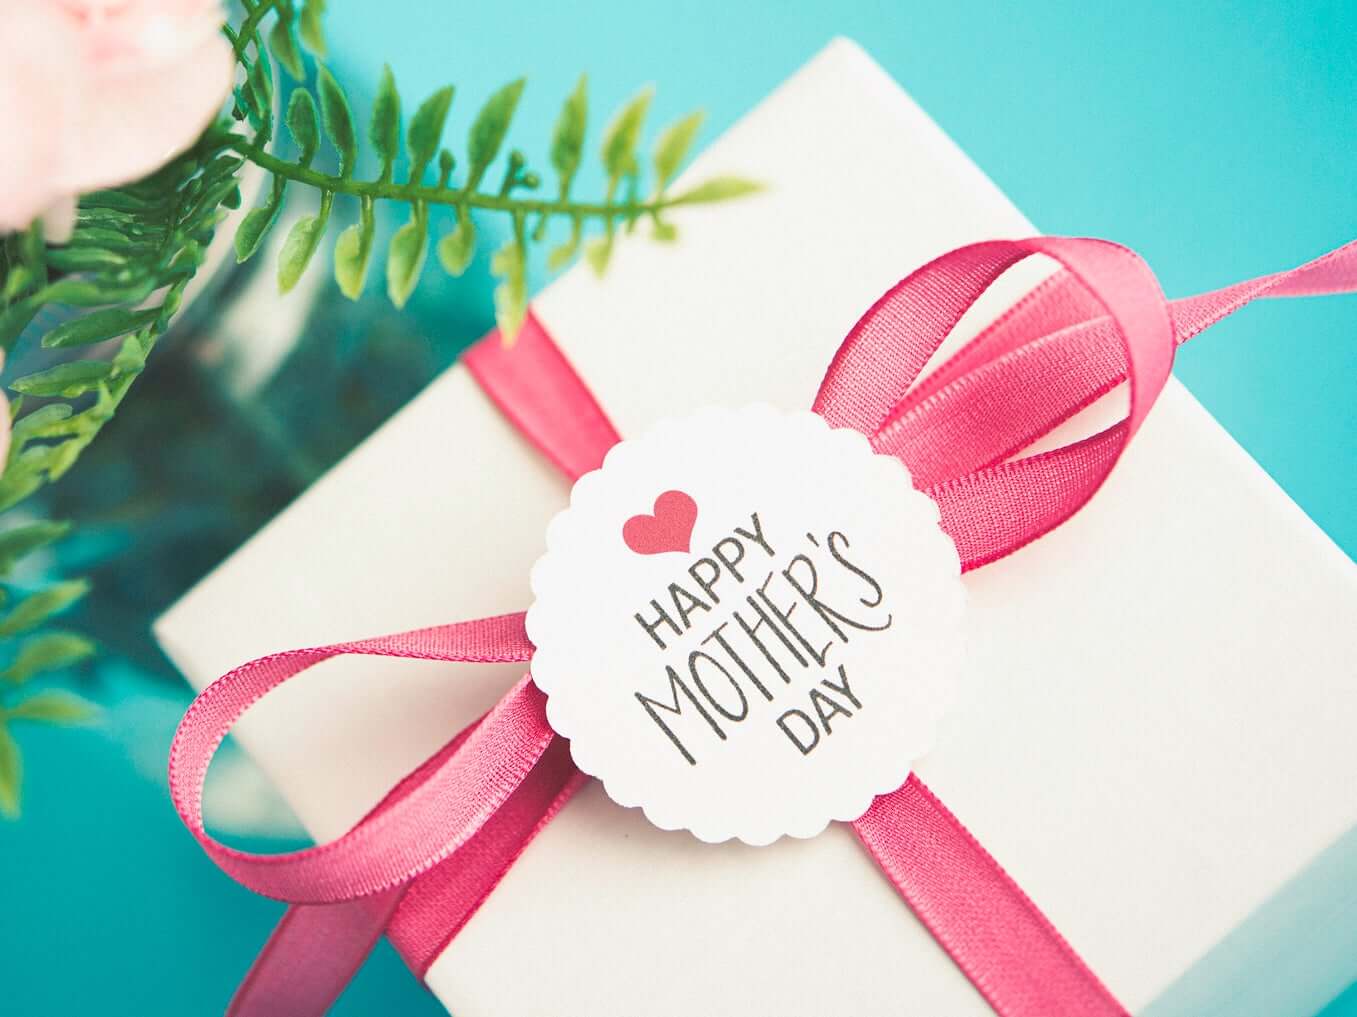 Mother's Day Gifts 2021: 9 Amazing Gifts Ideas